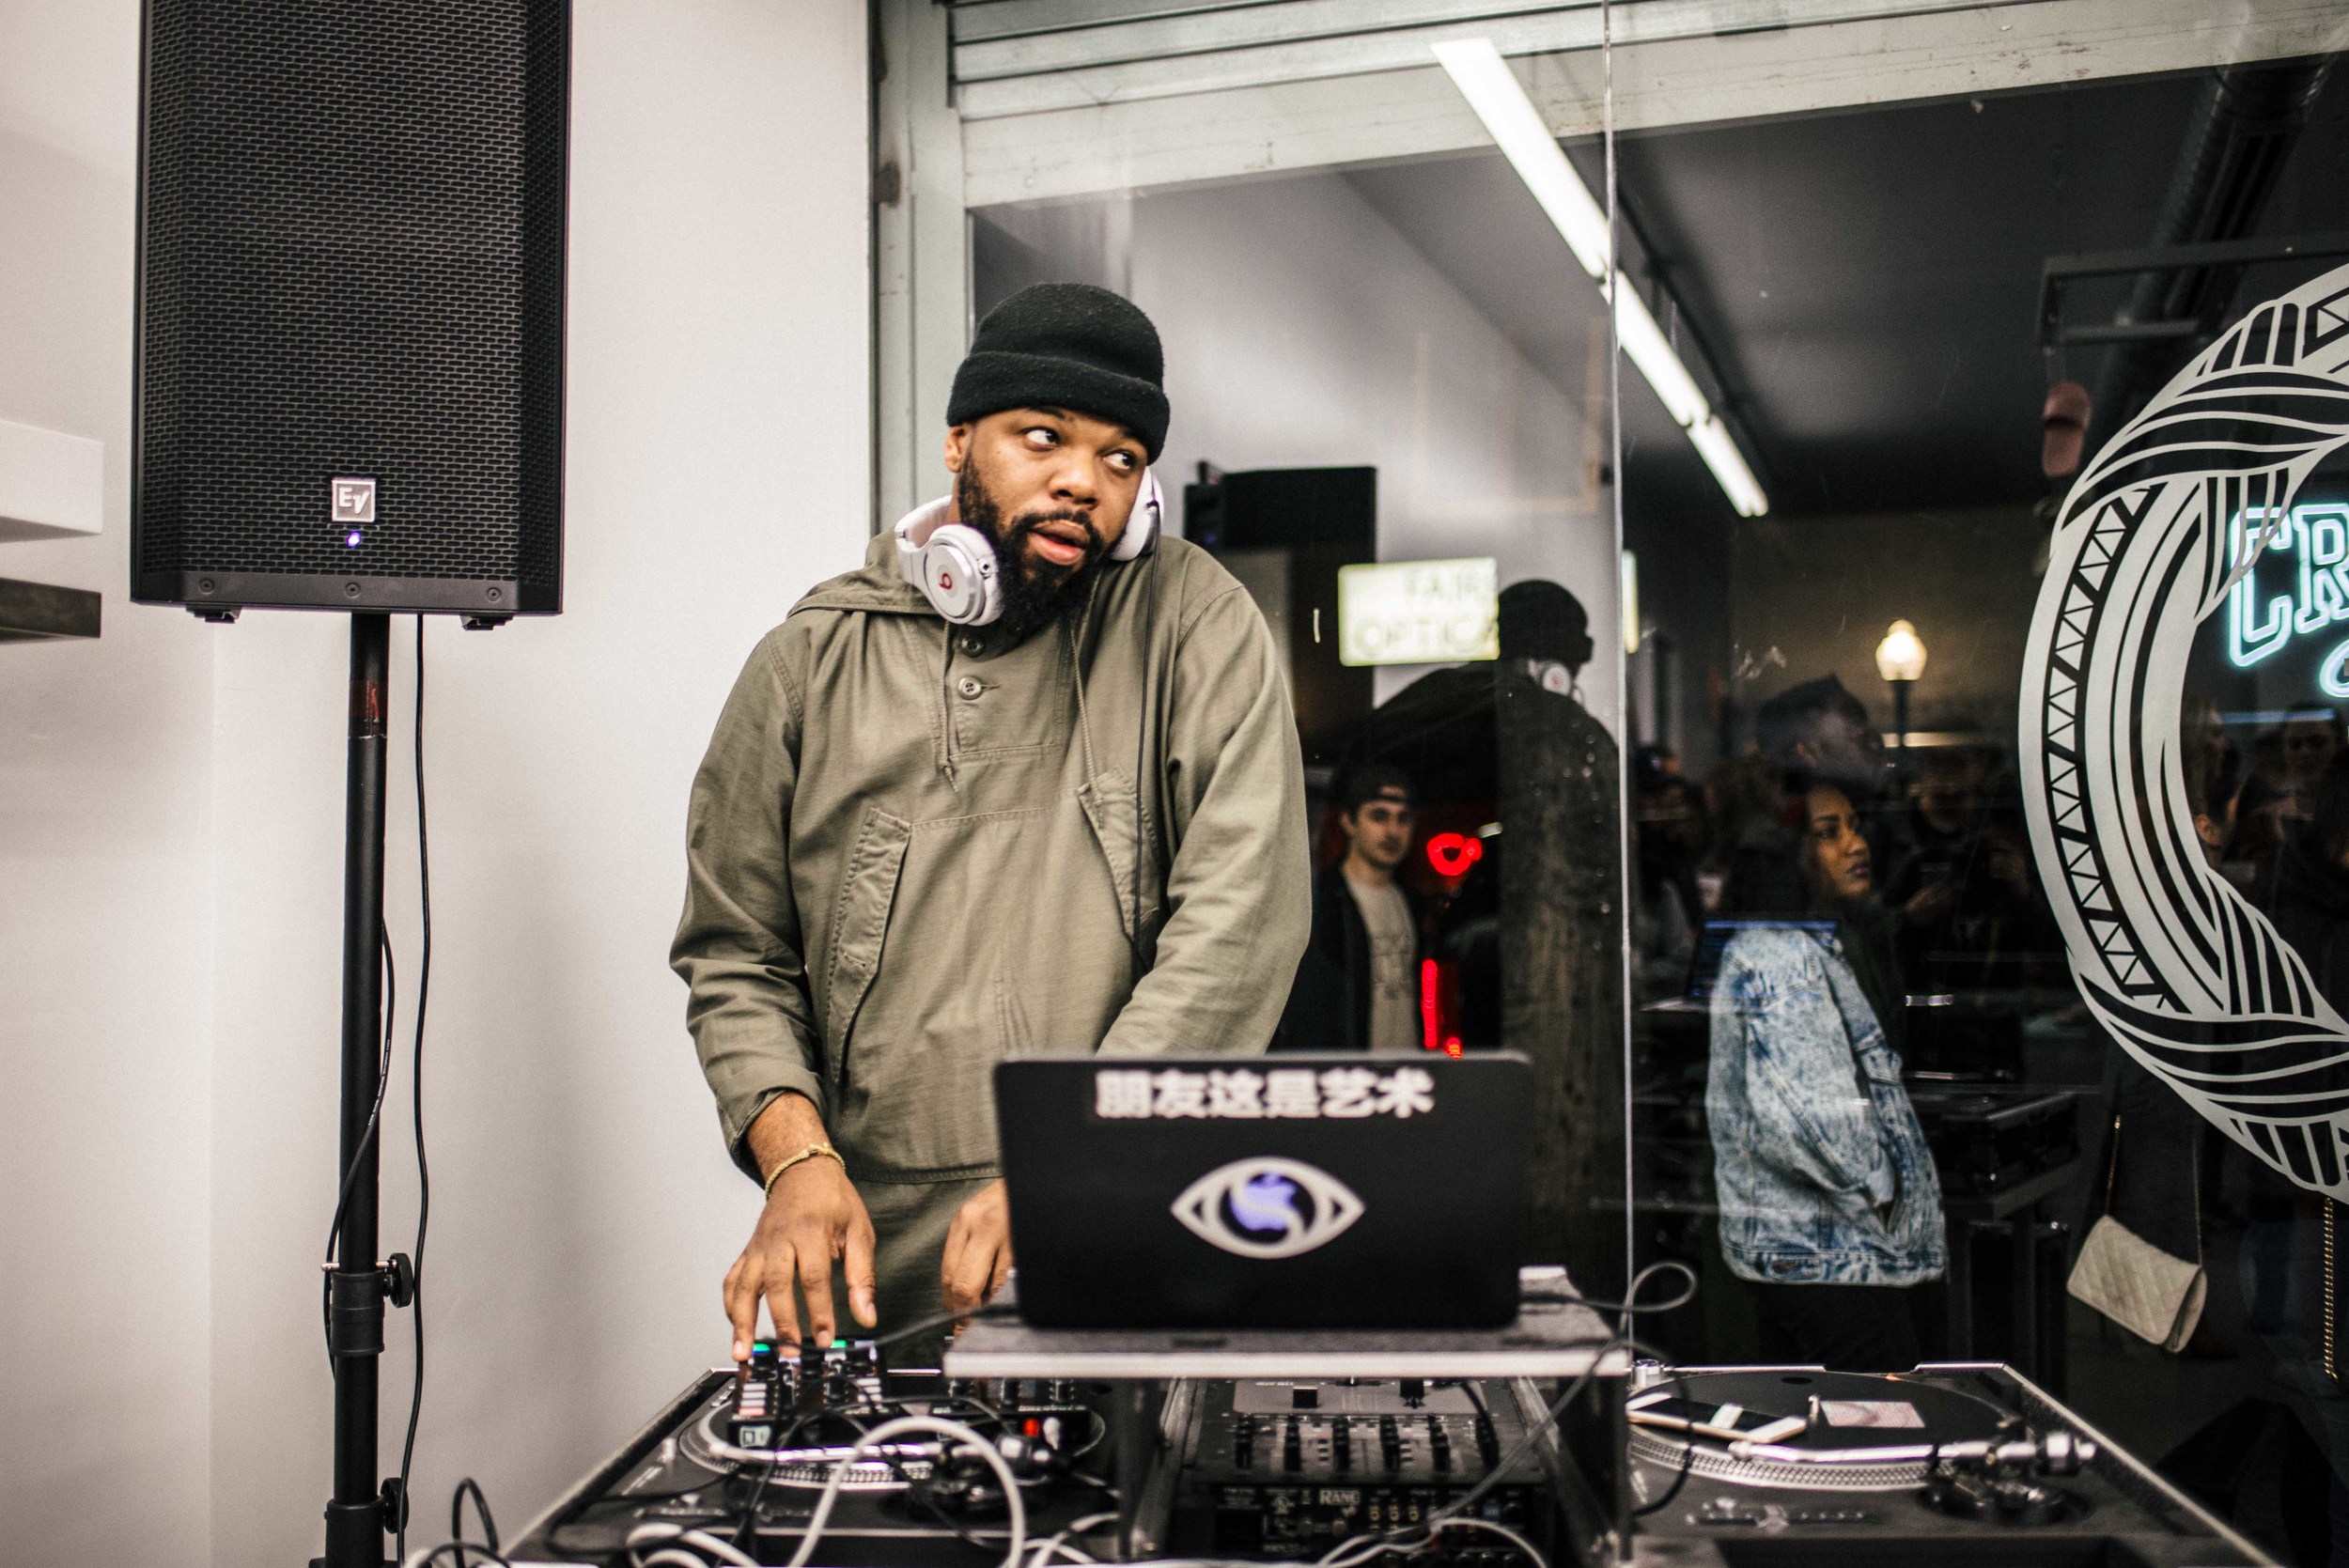  Sandalboyz Launch at Dope Fairfax (Jan 22). Pictured: Andre Power of Soulection. / Photo: © Diane Abapo for SUSPEND Magazine. 